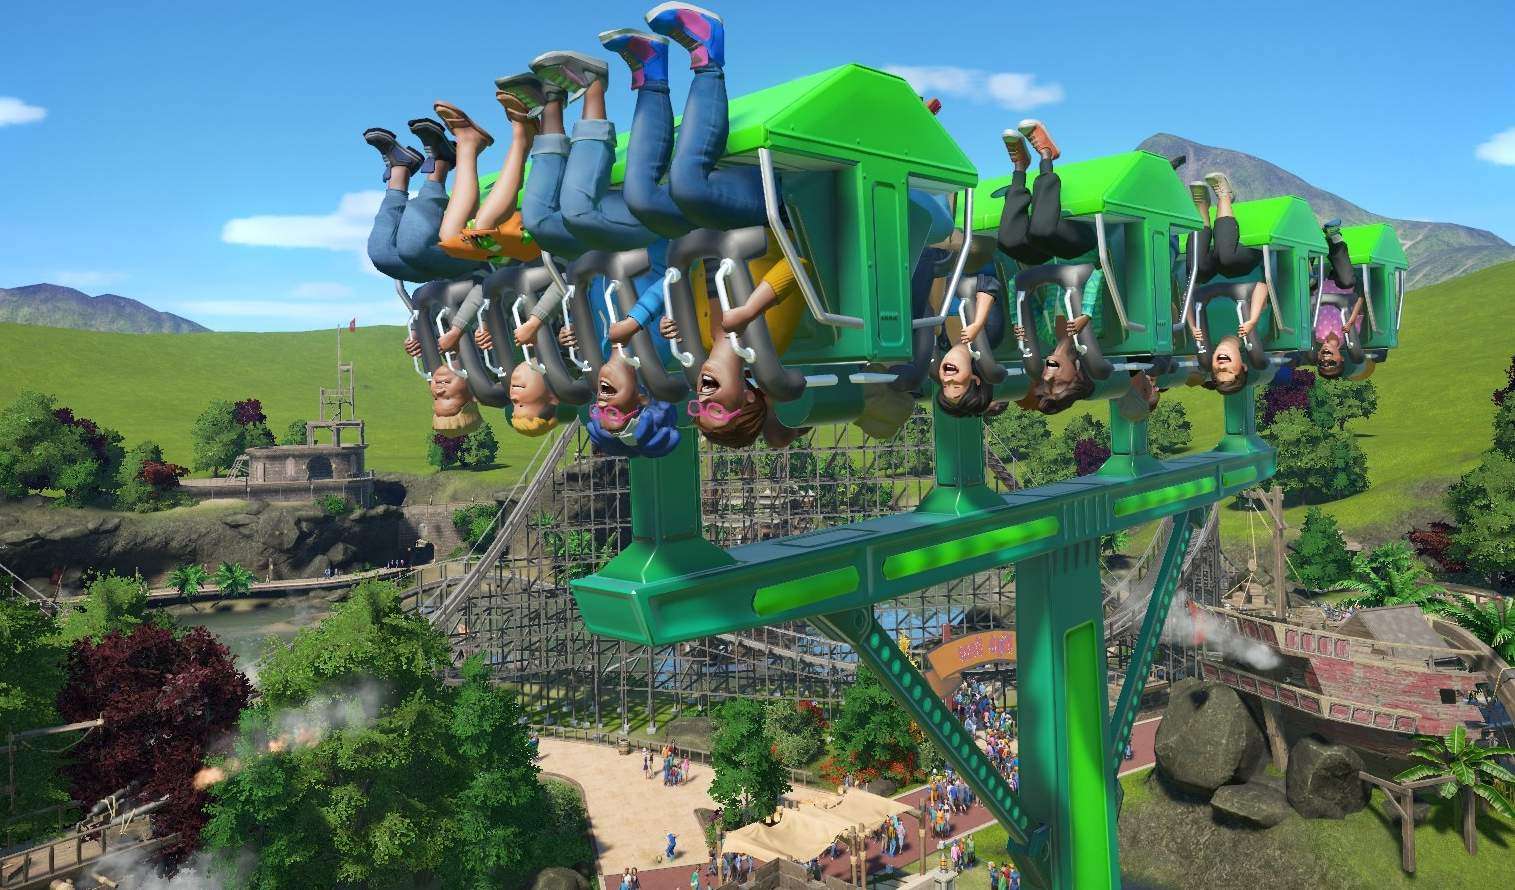 planet coaster water